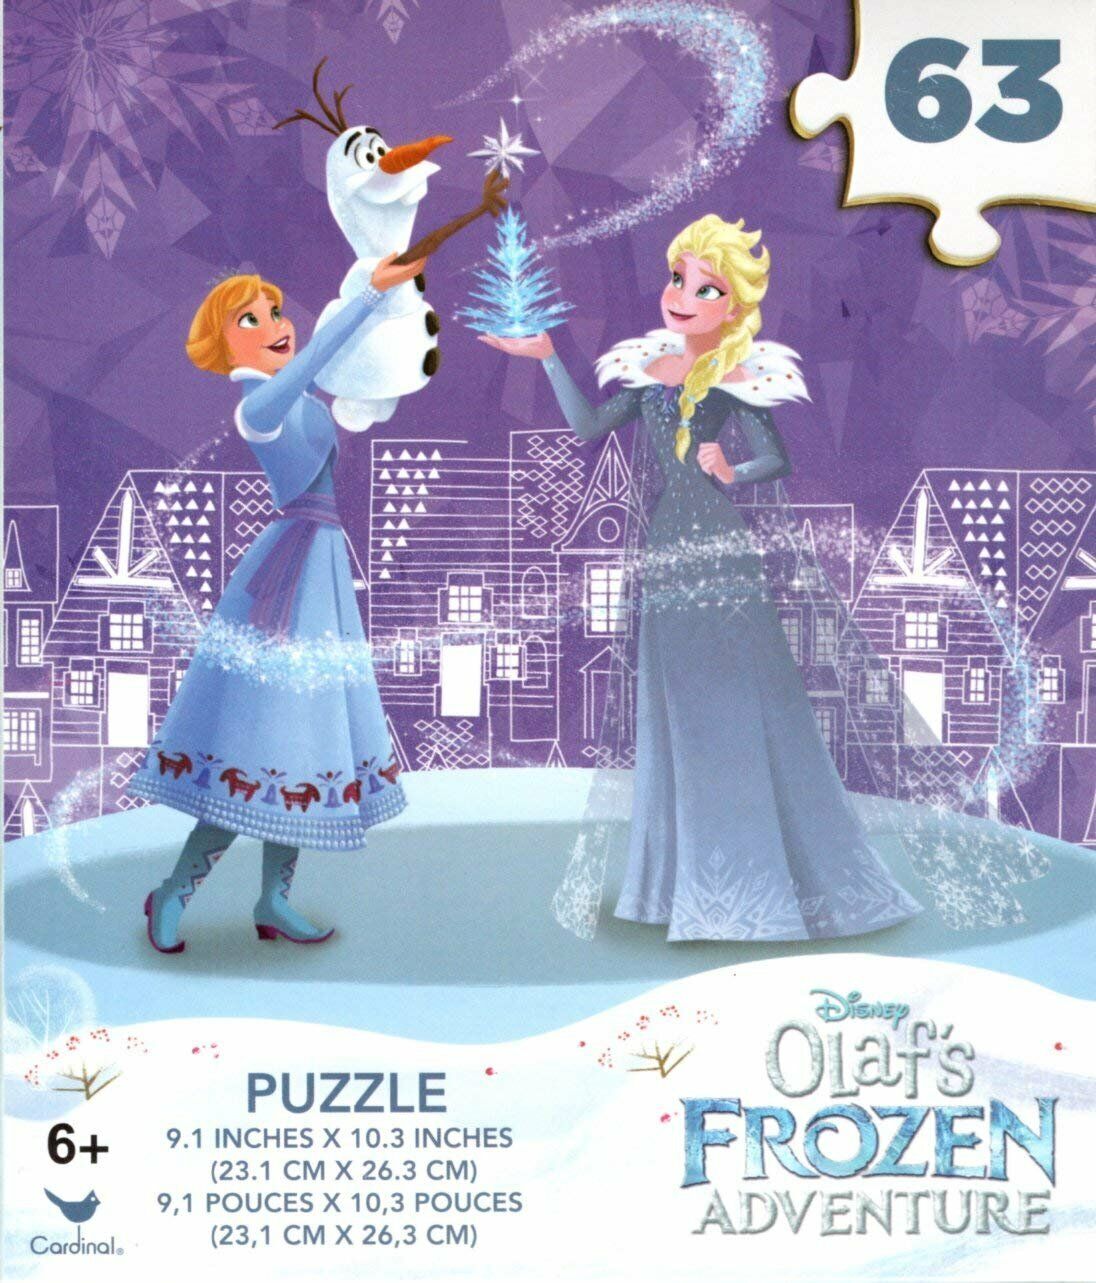 Olaf's Frozen Adventure - 63 Pieces Jigsaw Puzzle - v2